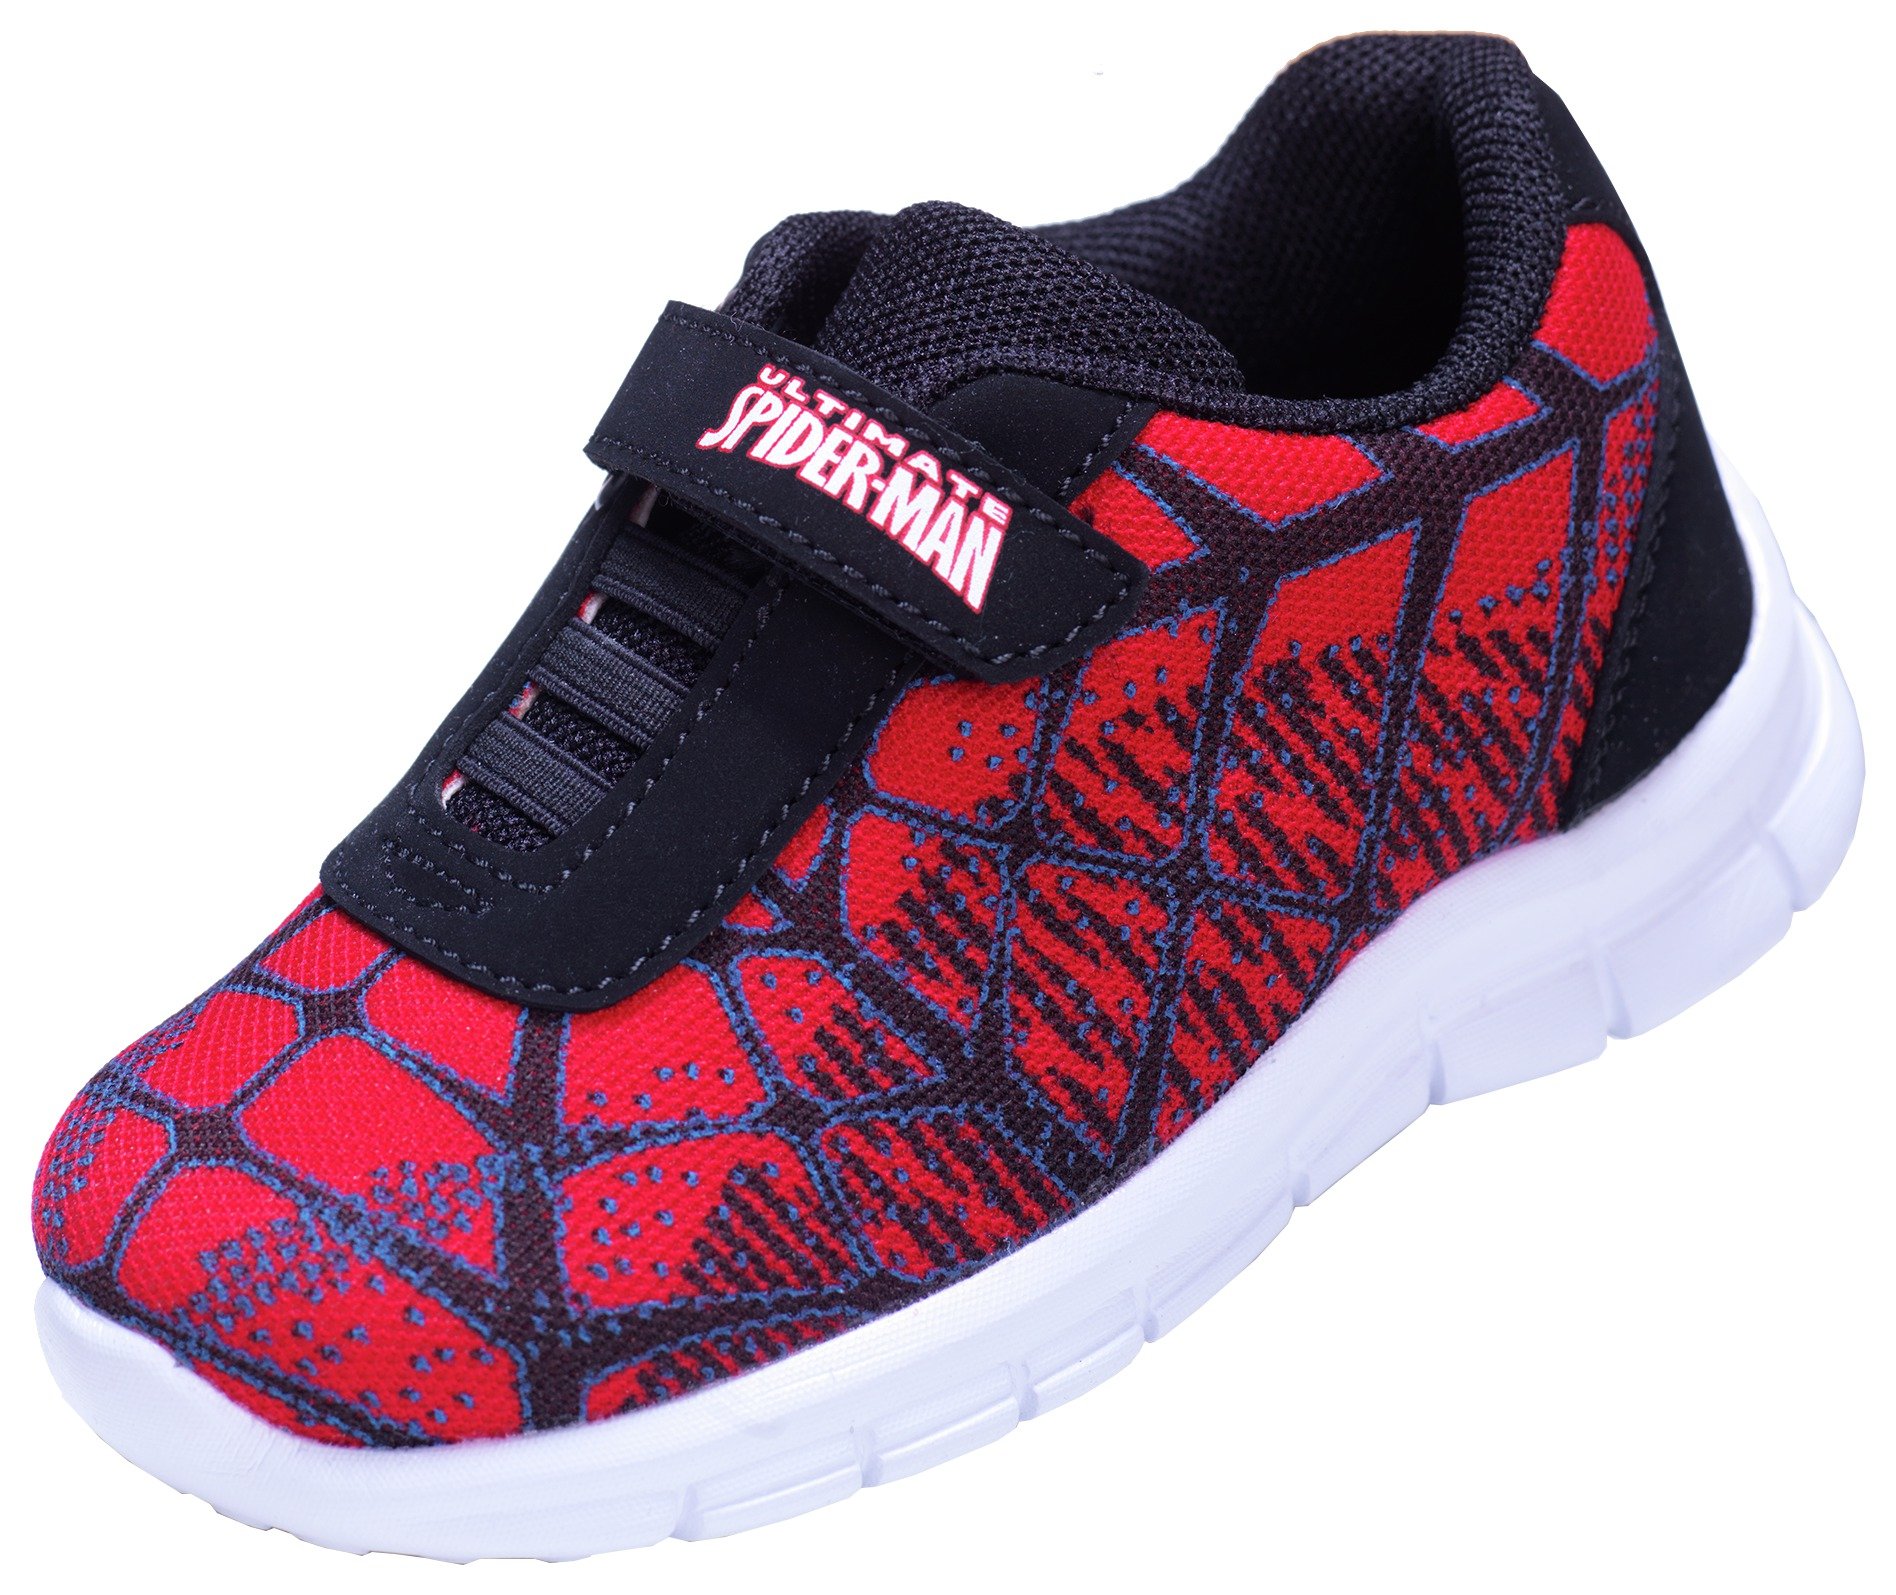 Spider-Man Trainers - Size 11.